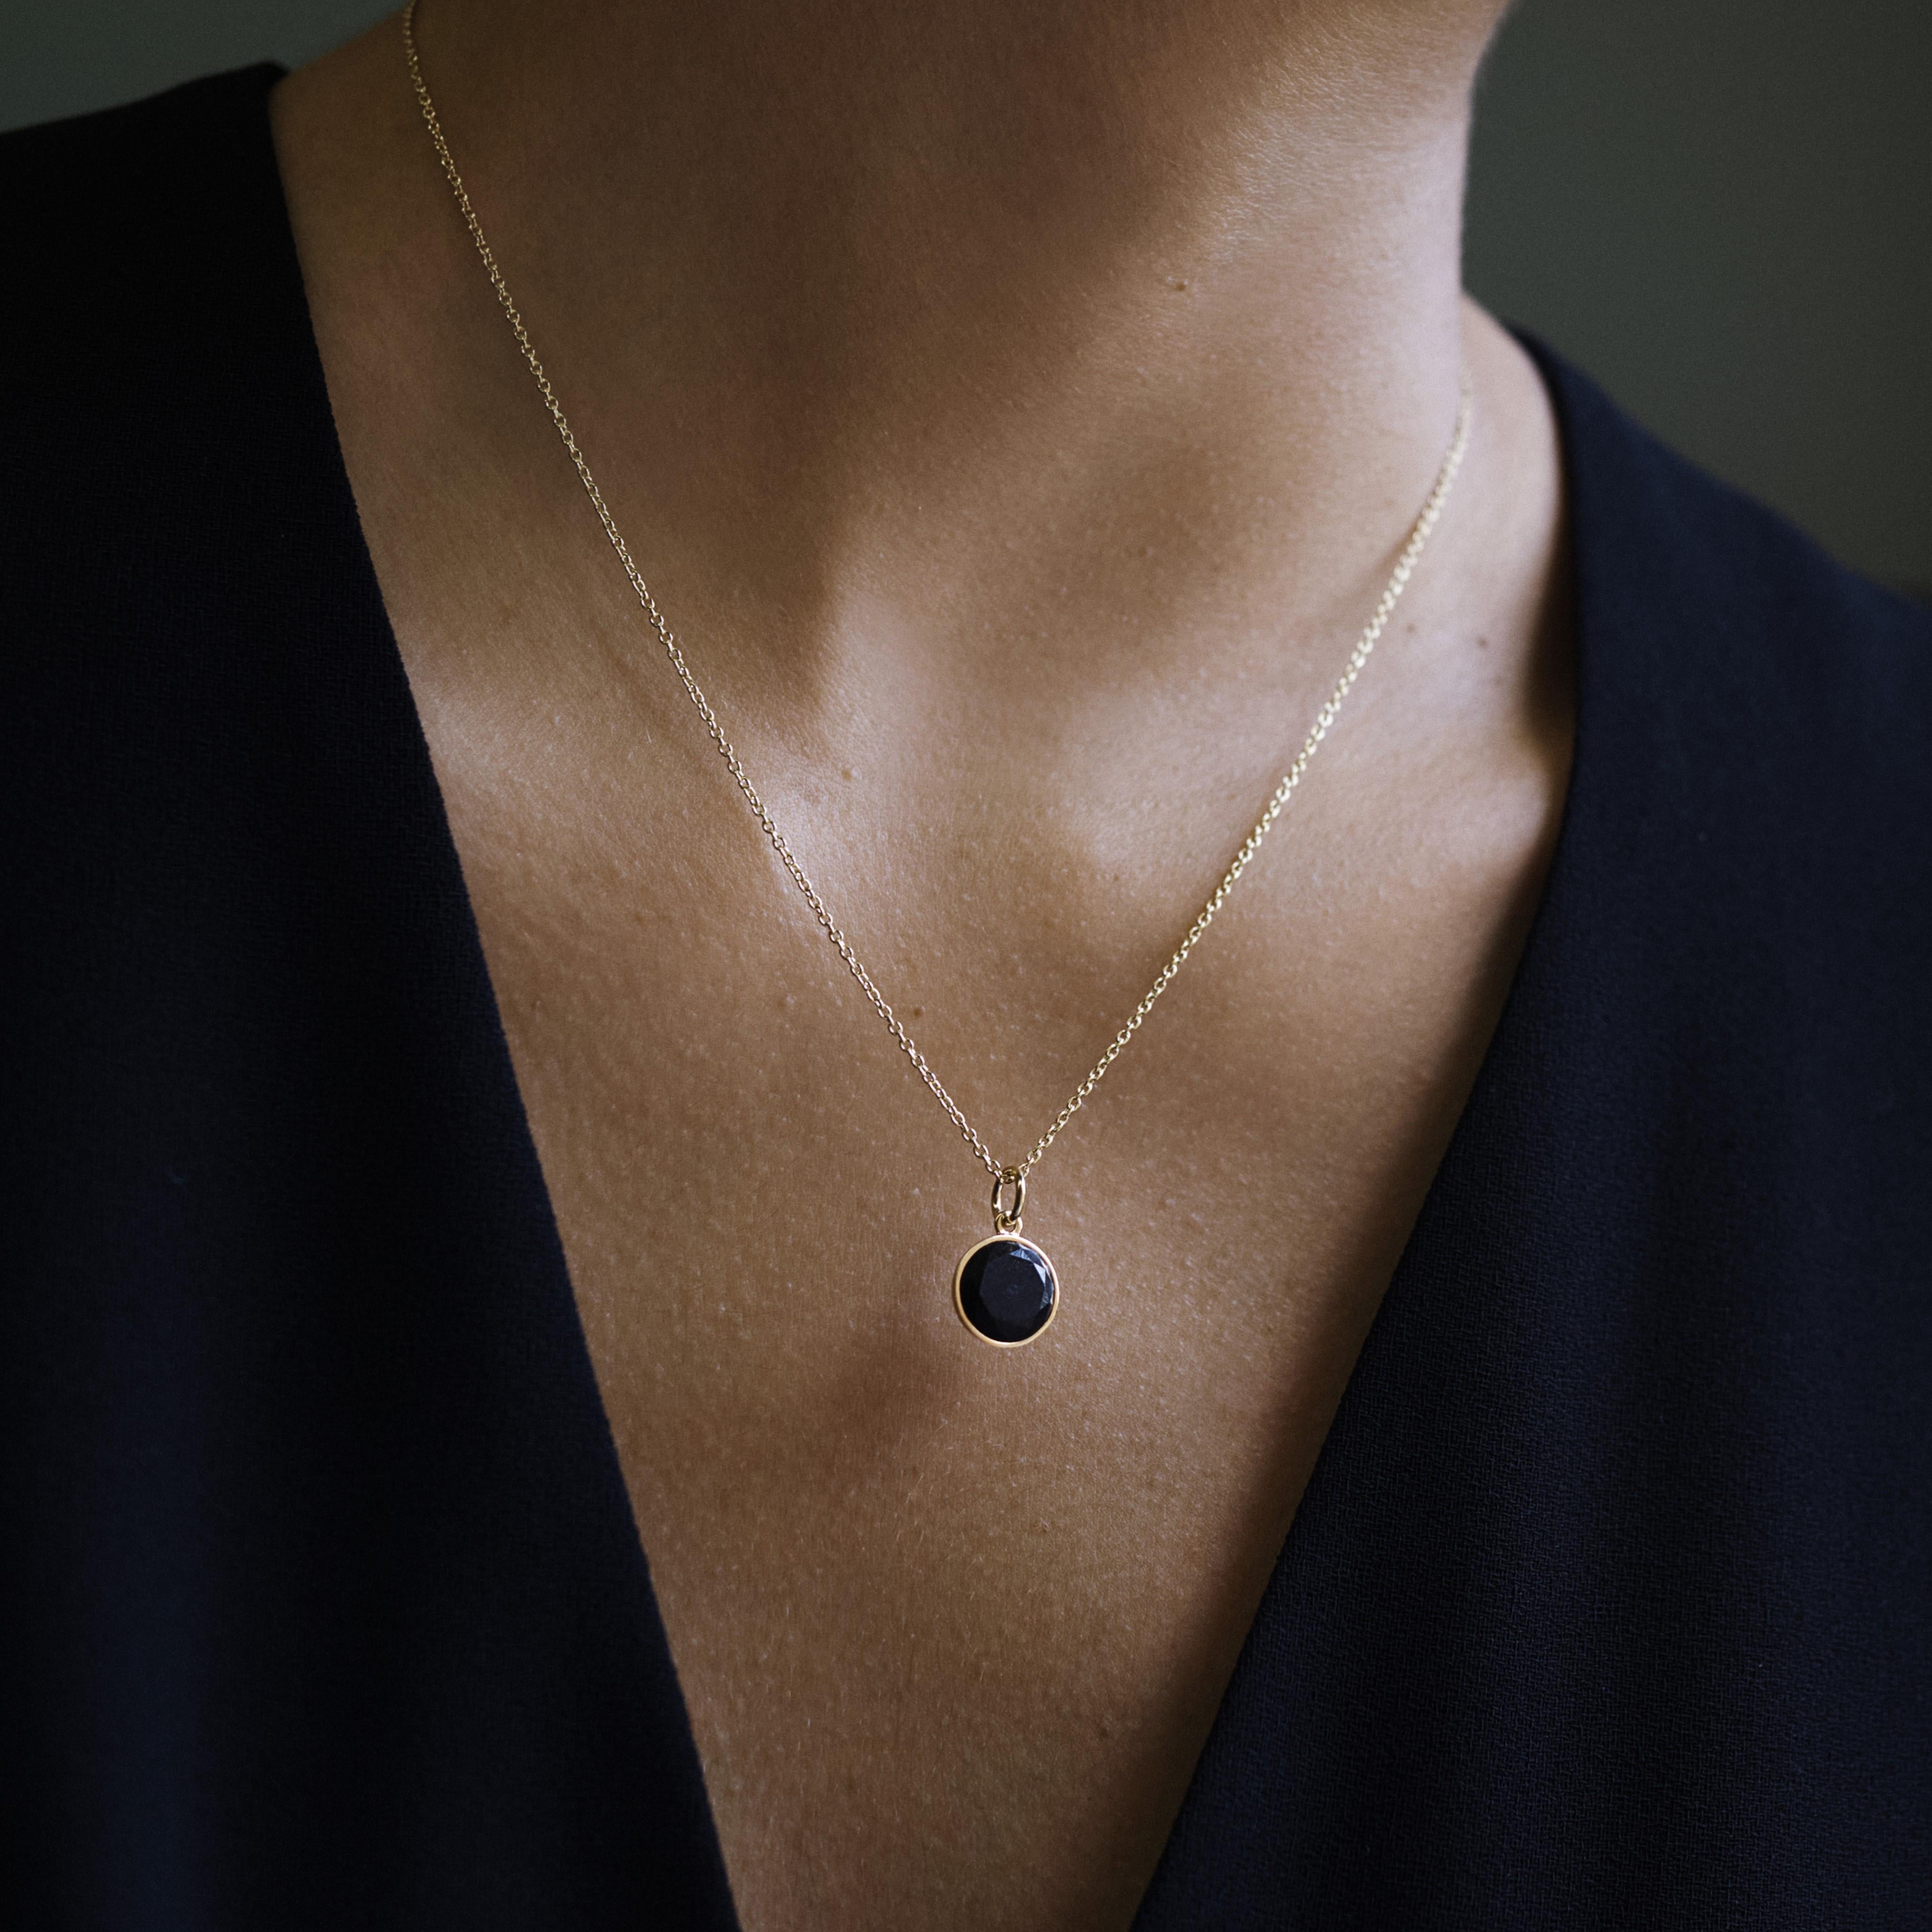 Also available in recycled sterling silver and as a necklace.

The gorgeous ETERNITY pendant in solid, recycled 18k gold. The pendant is set with a large brilliant-cut Mpingo Blackwood diamond.

Dimensions:
Diameter: 1 cm.

We use the stunning